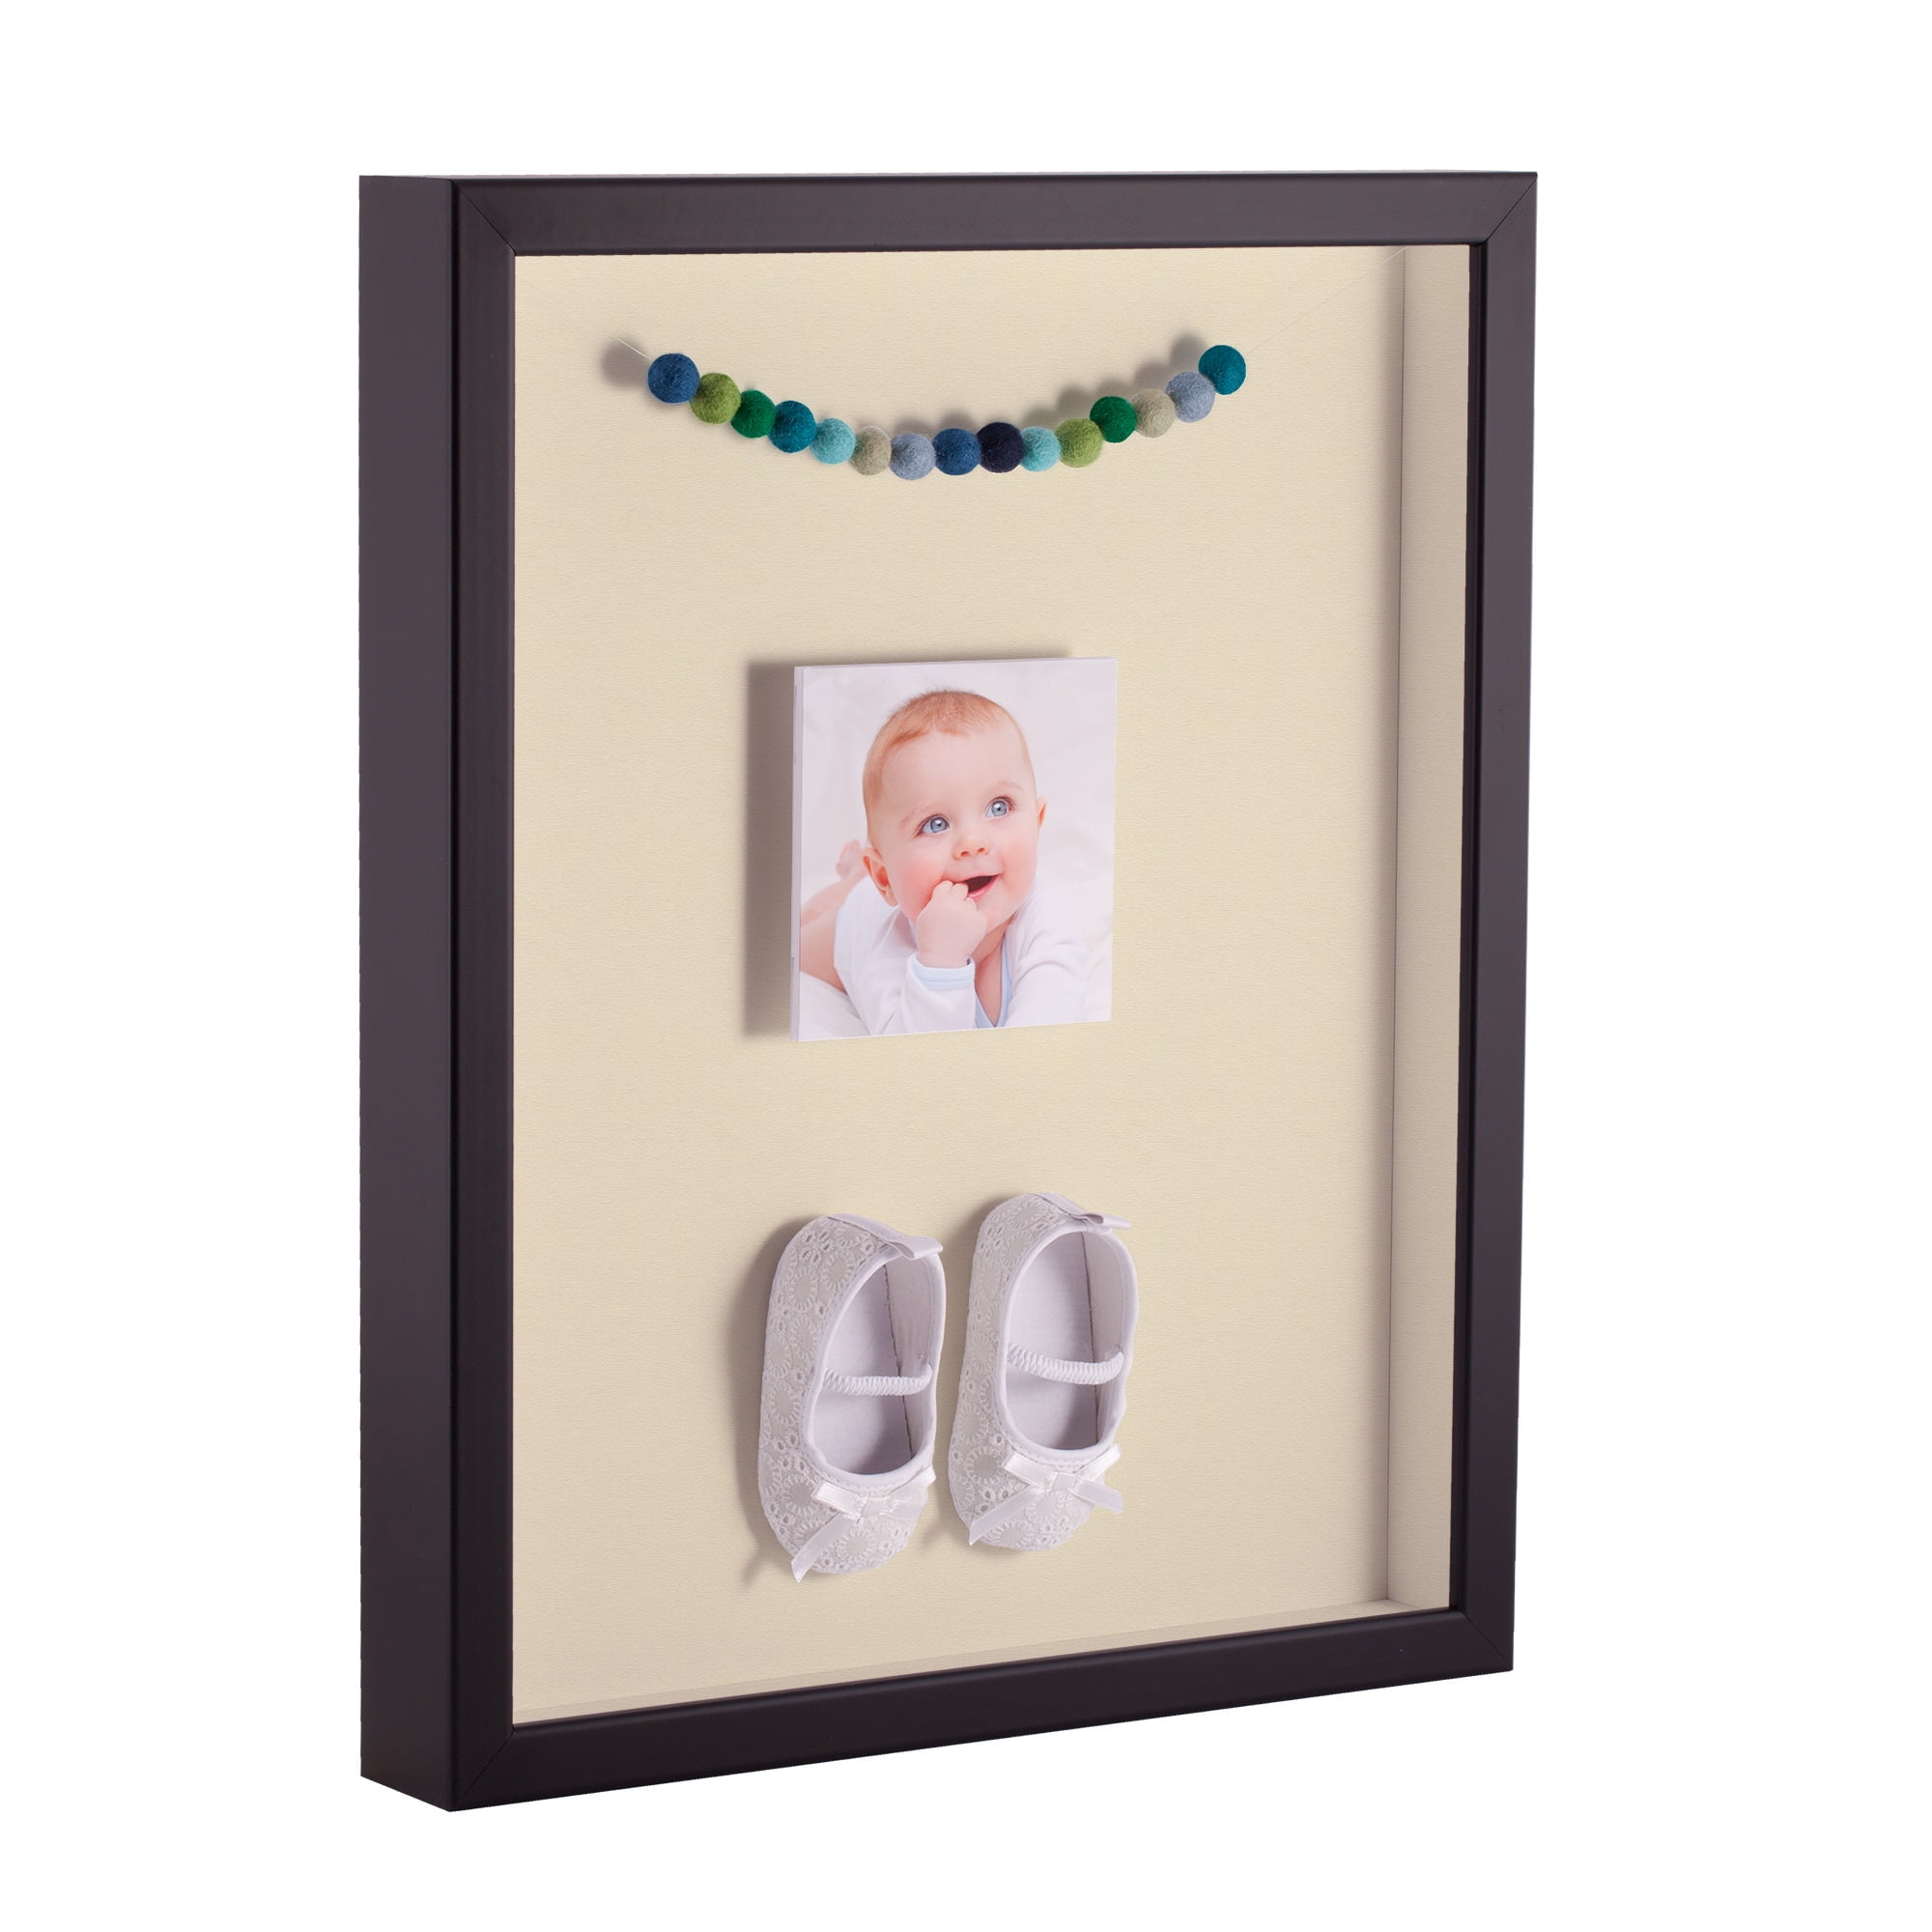 ArtToFrames 14x14" Shadow Box Frame Various Colors Framed in White 